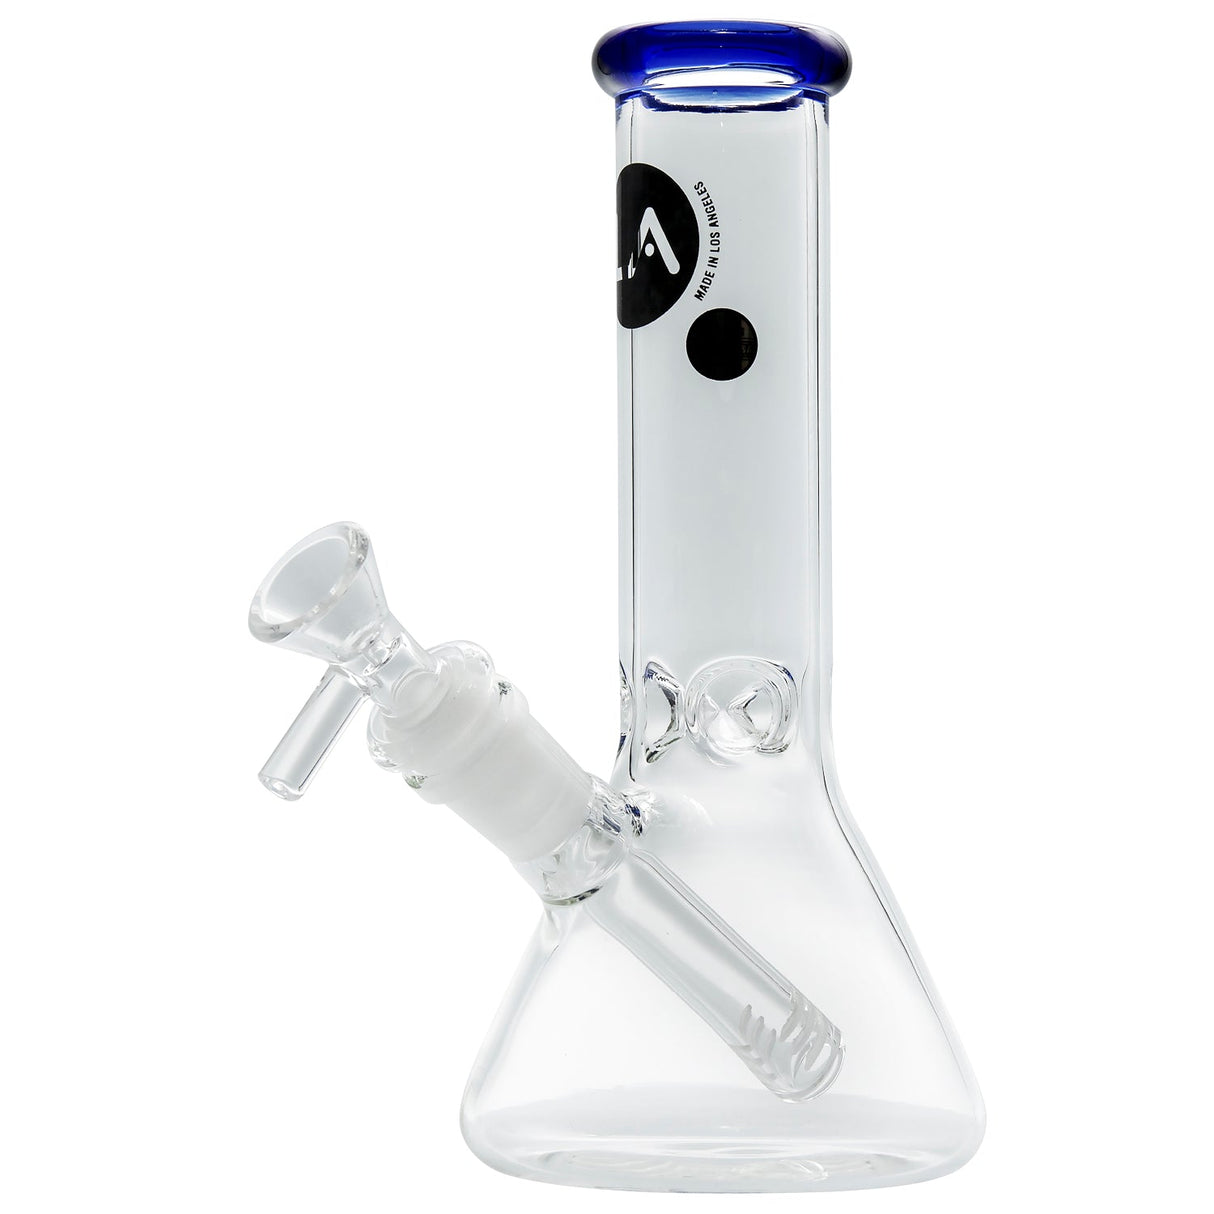 LA Pipes 8" Beaker Bong in Clear Borosilicate Glass with Blue Accents and Glass on Glass Joint